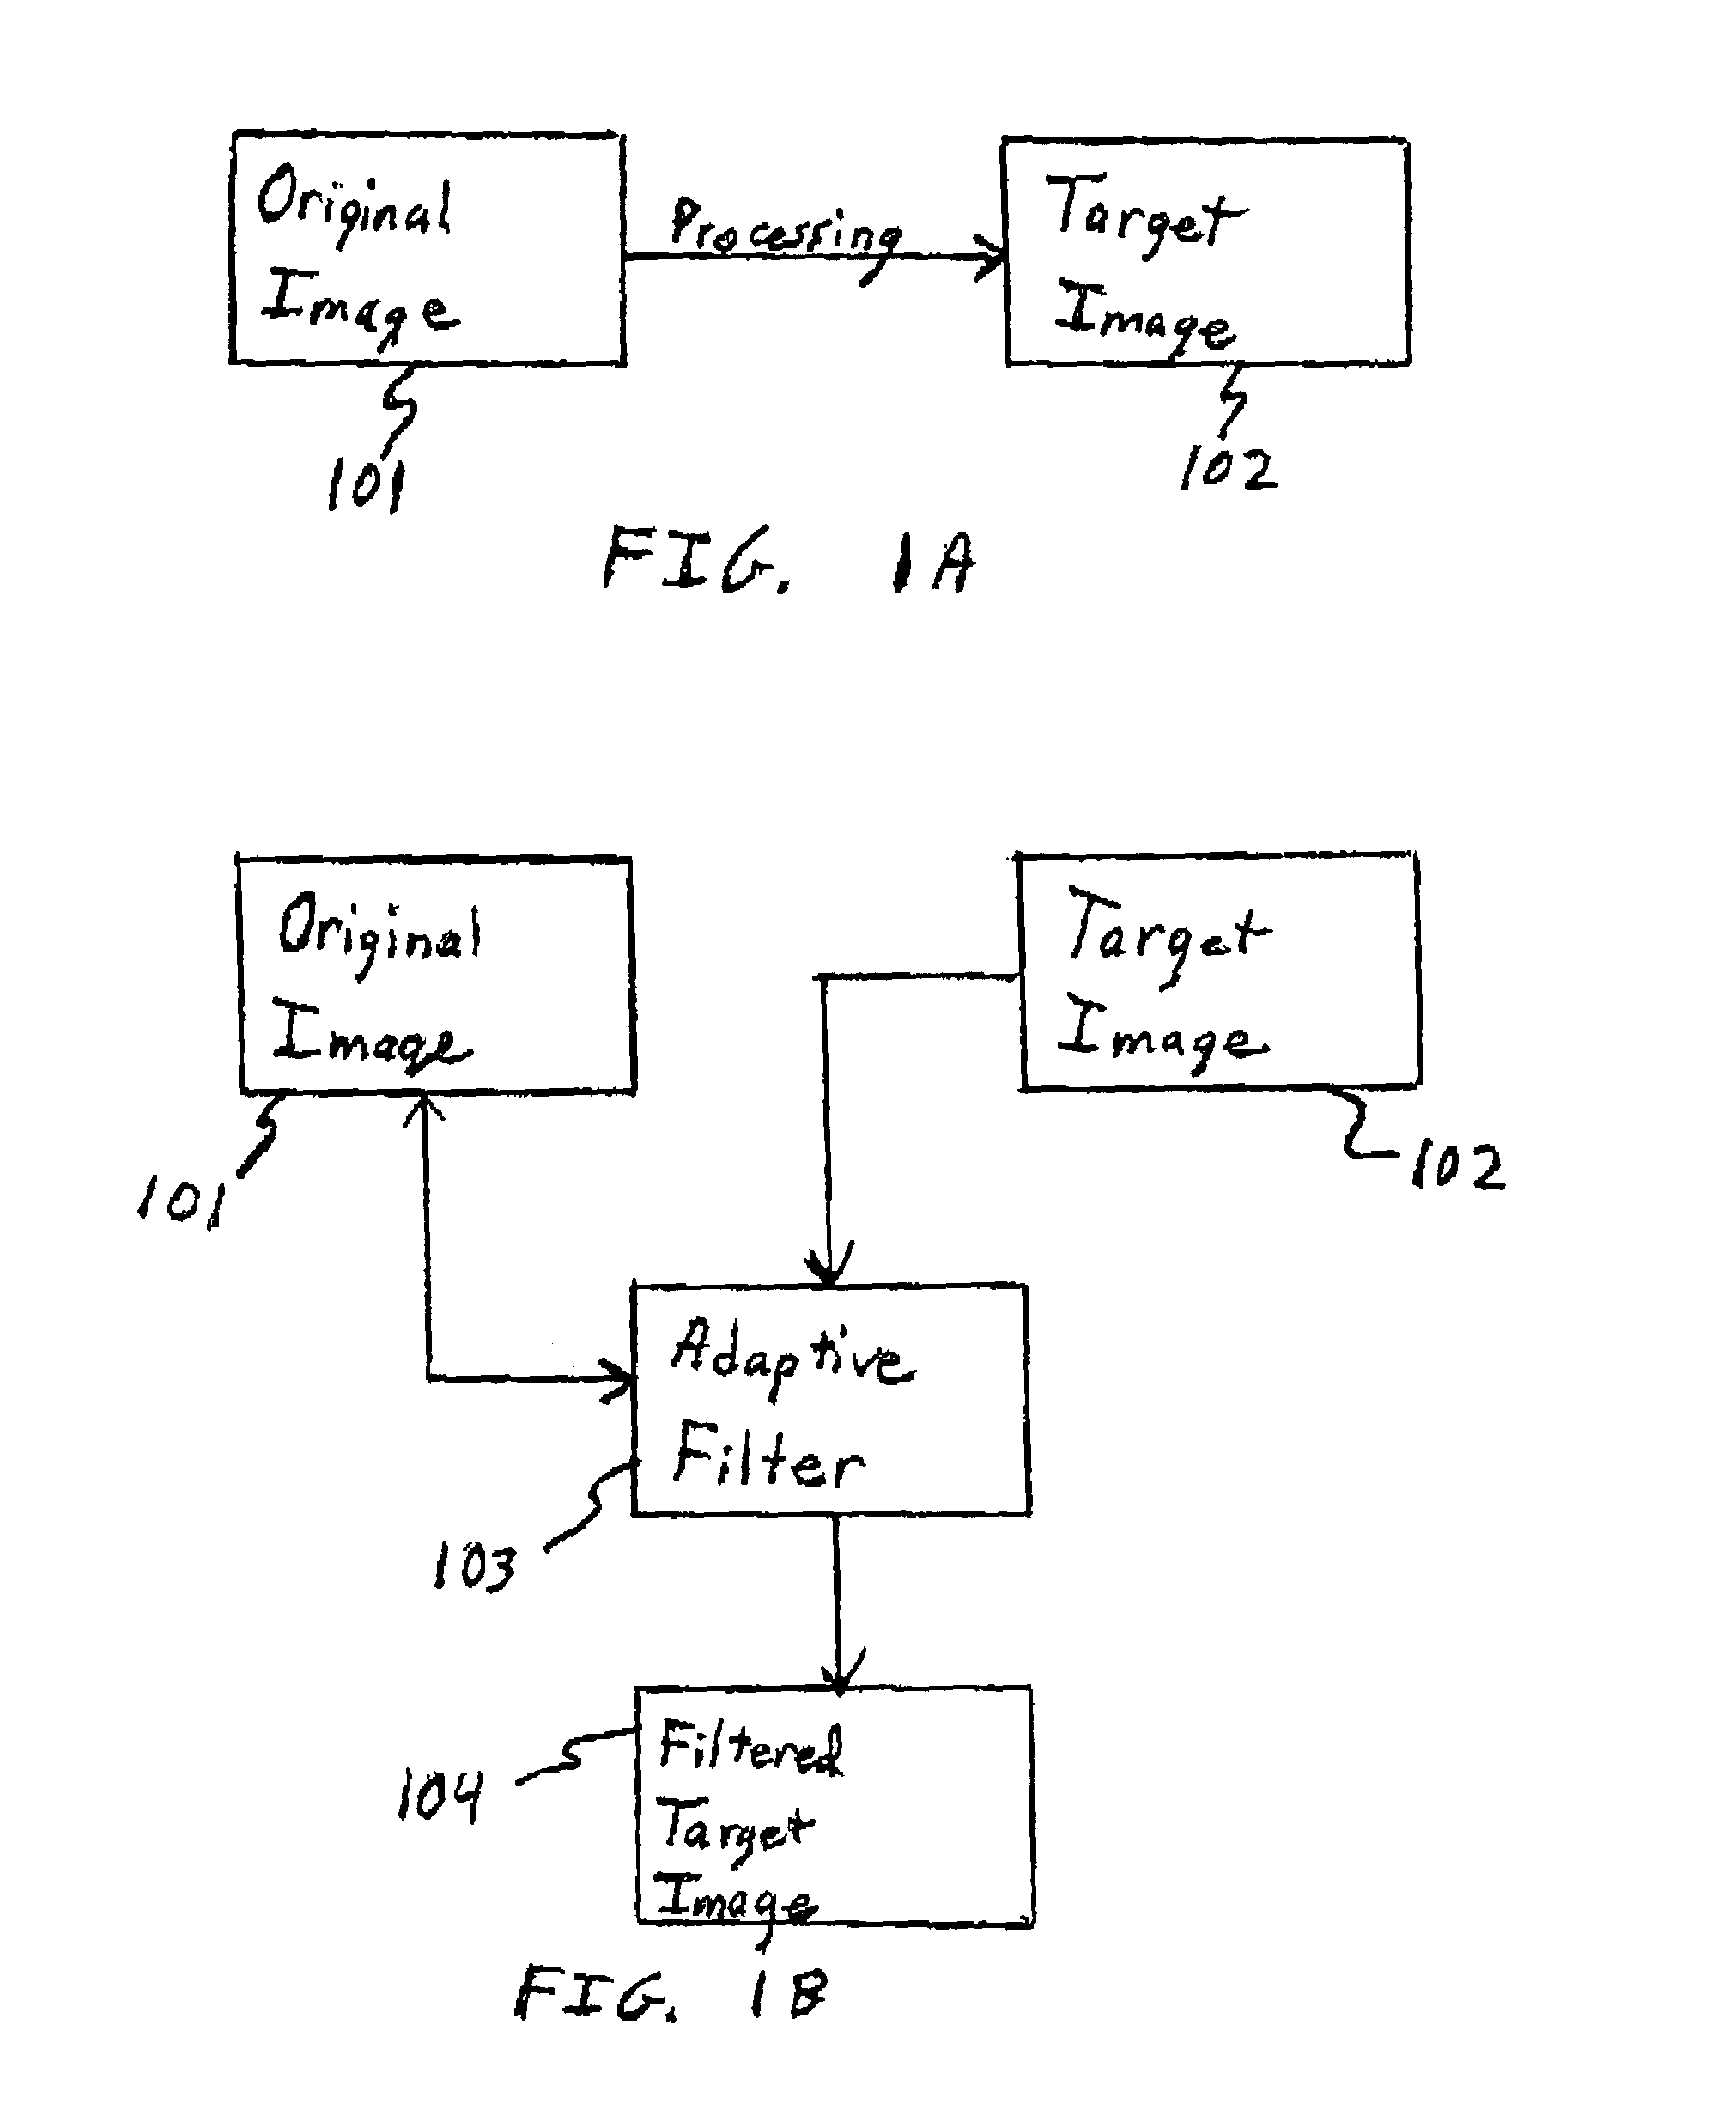 Adaptive filtering of visual image using auxiliary image information